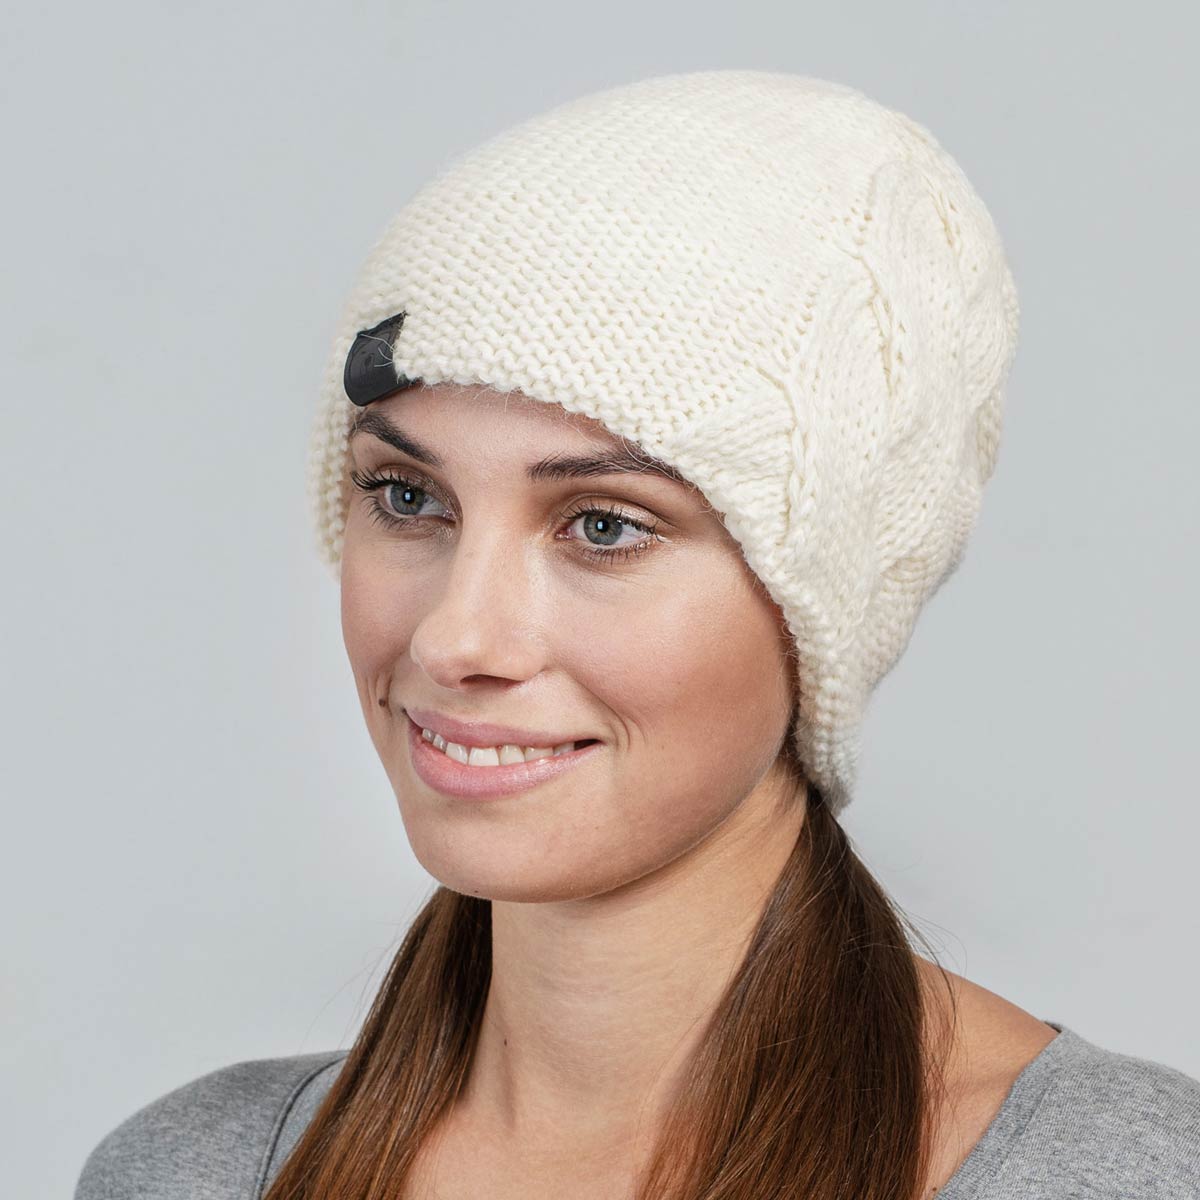 bonnet-femme-blanc-chaud-confortable-made-in-europe--CP-01657